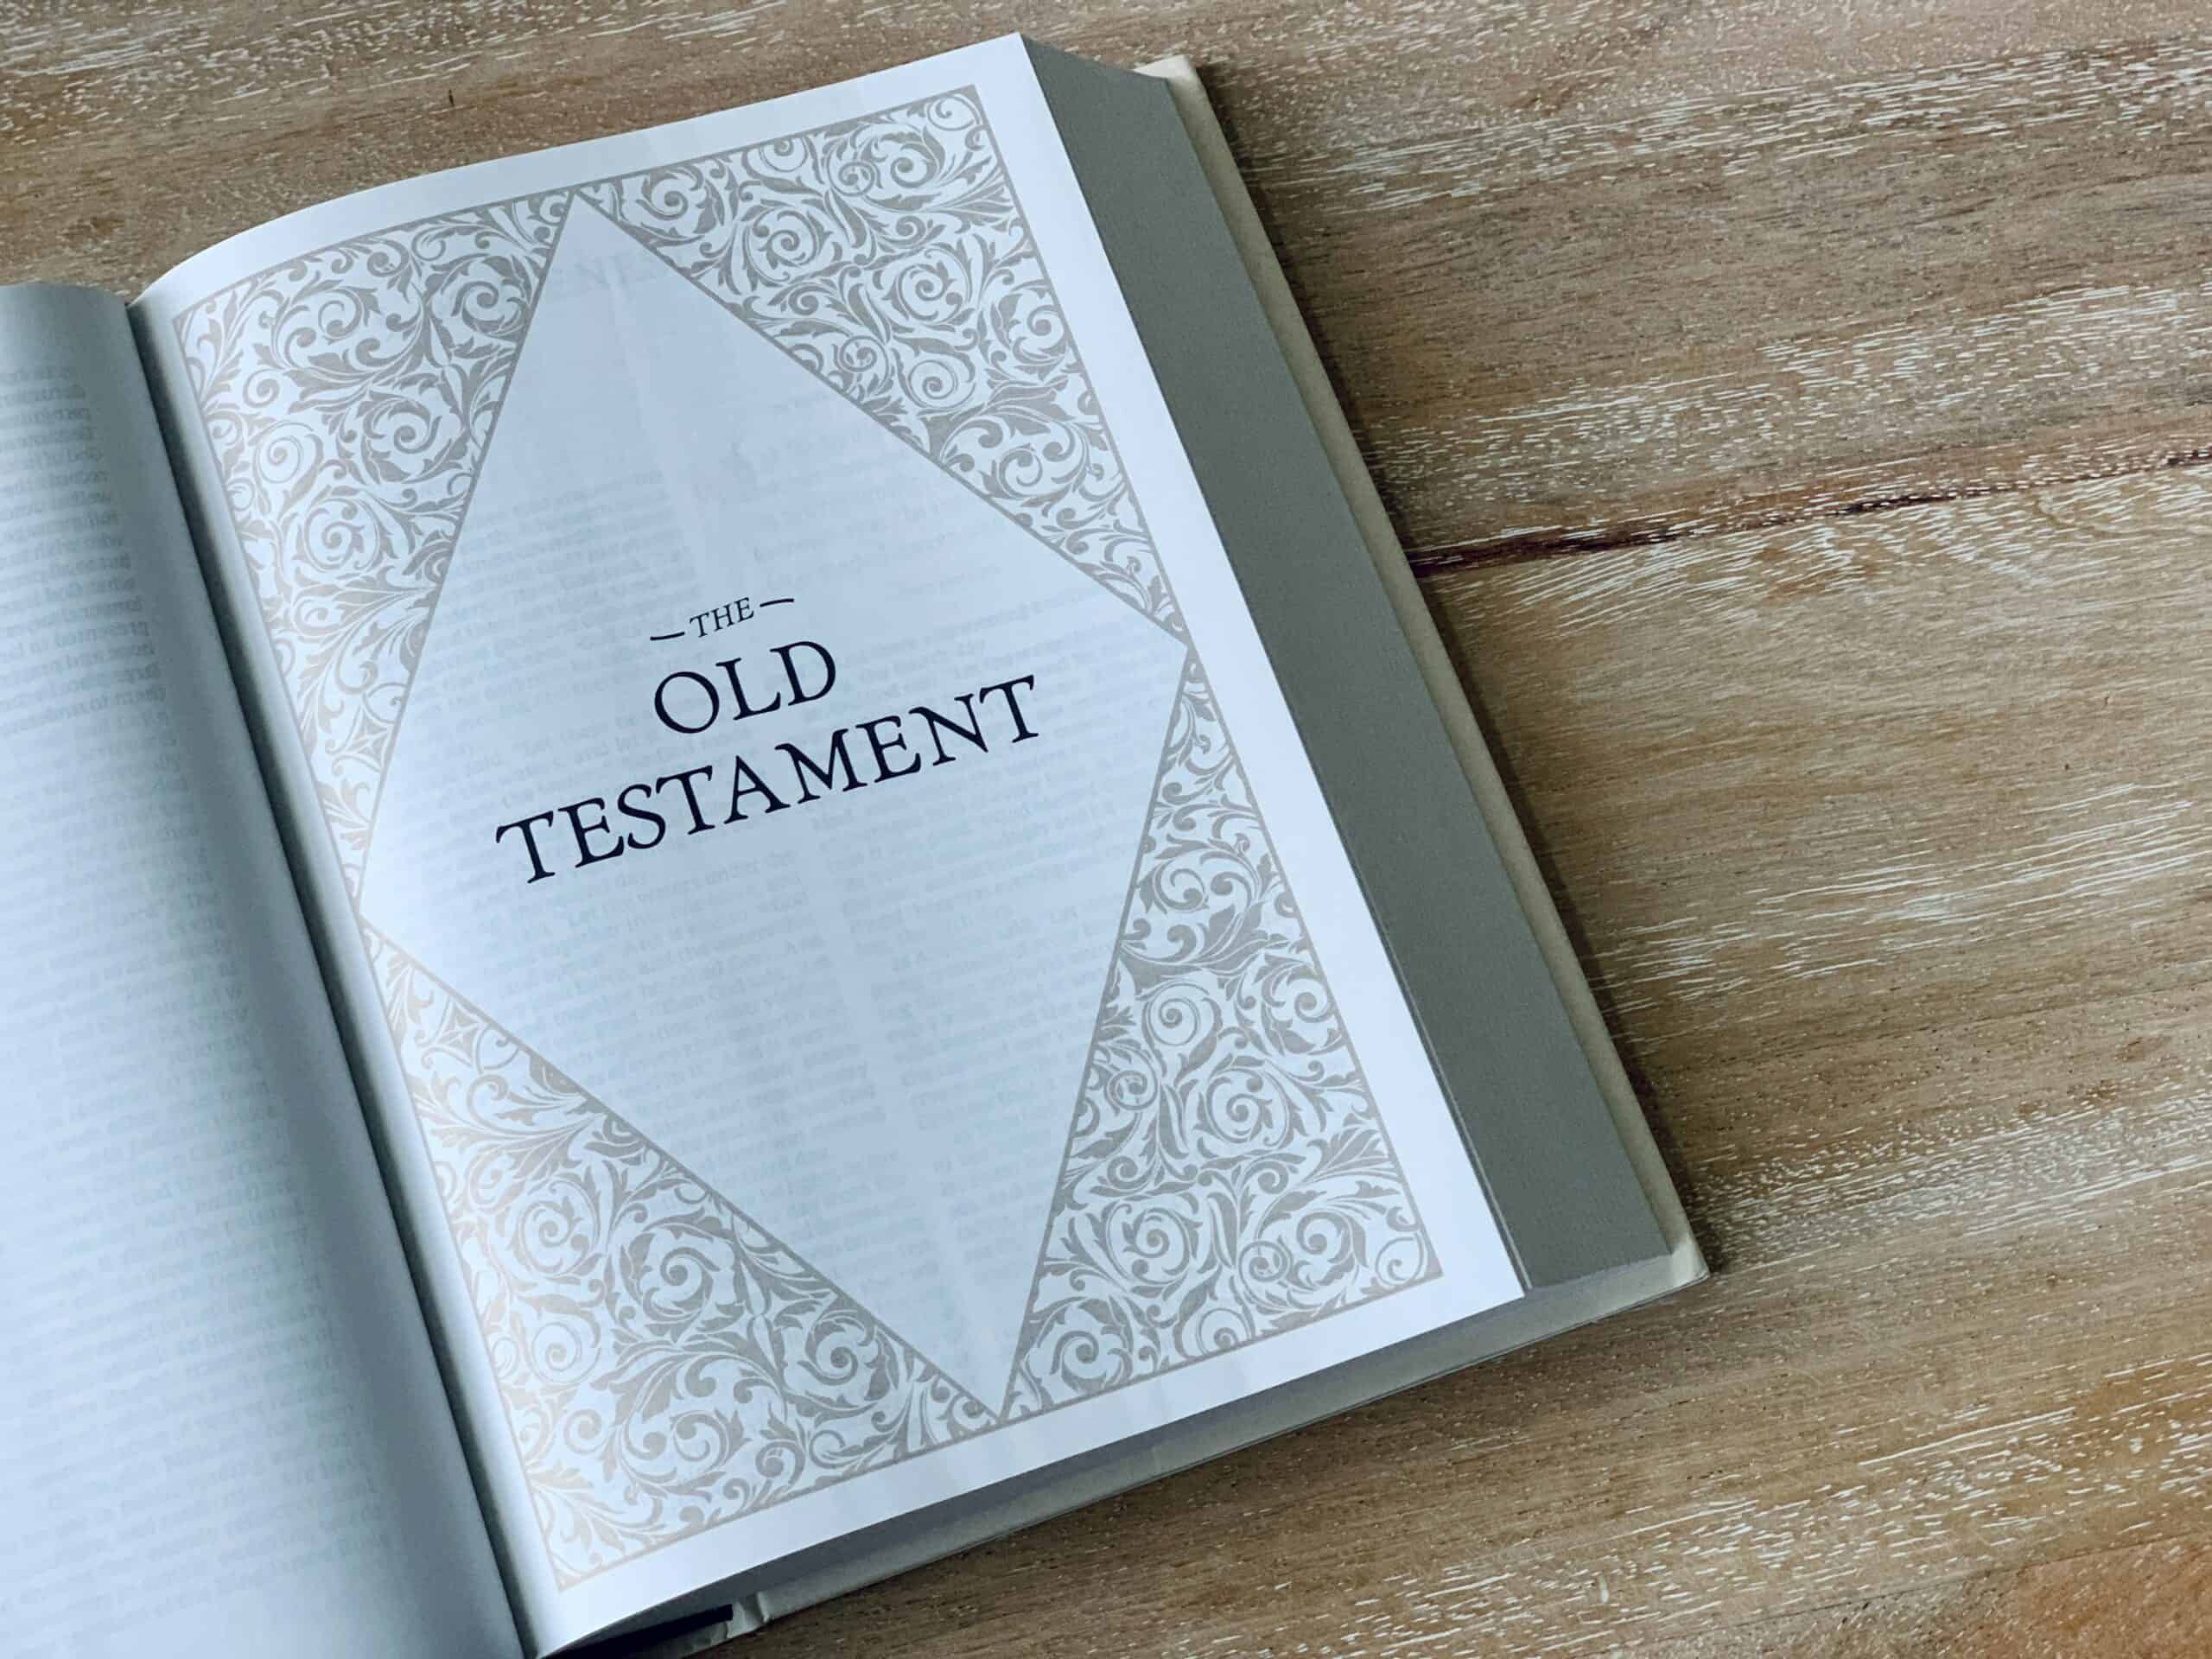 Bible opened to the Old Testament title page